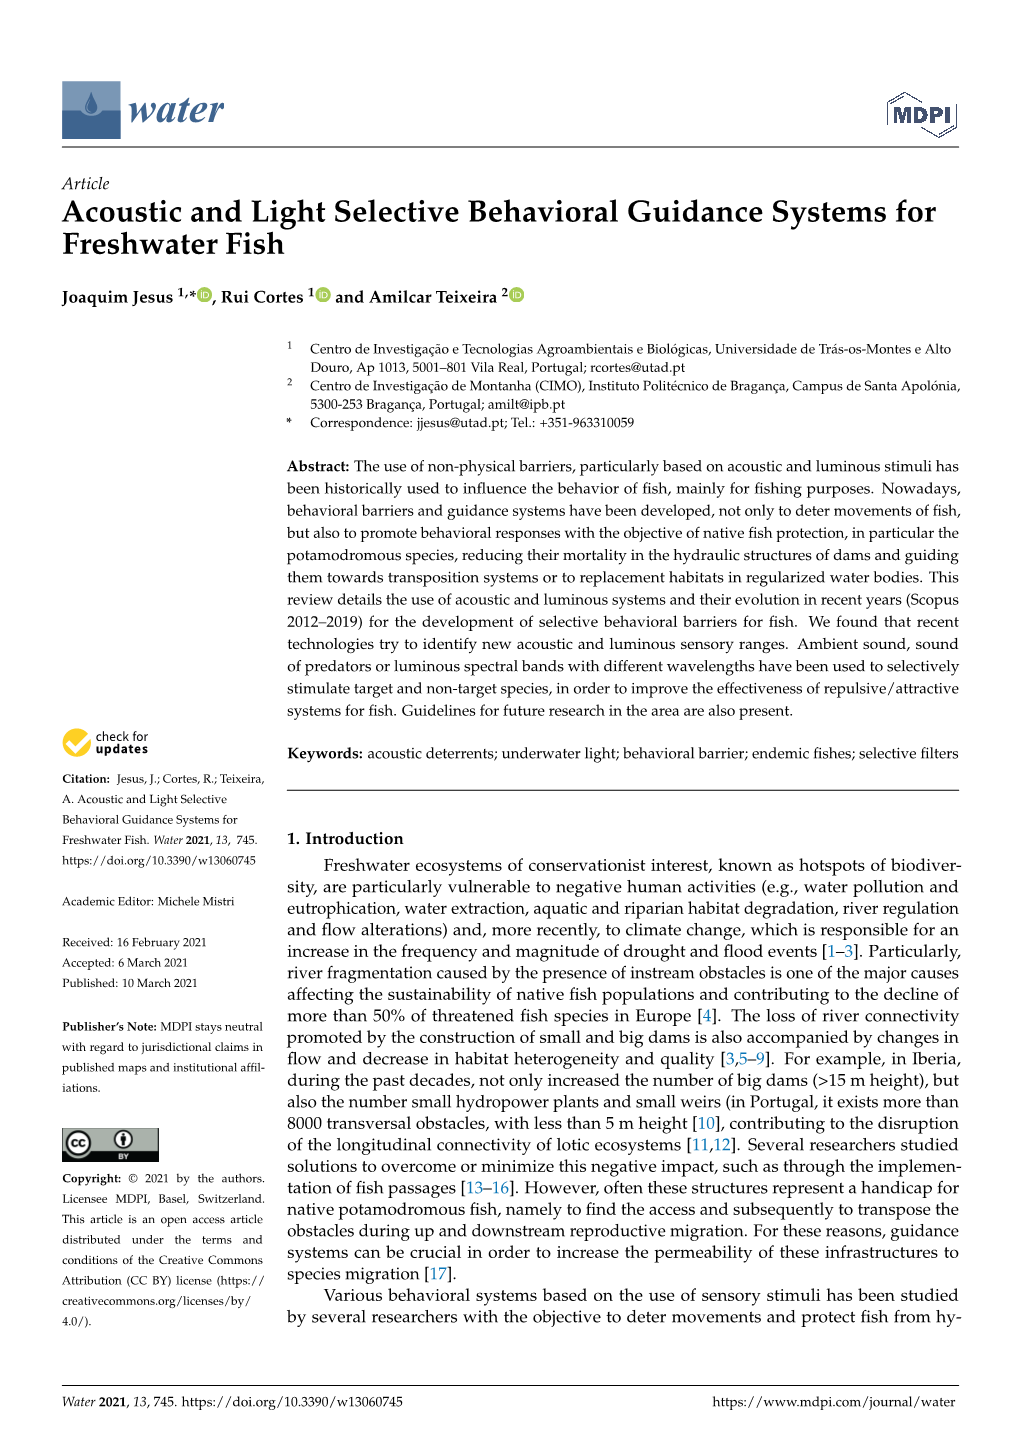 Acoustic and Light Selective Behavioral Guidance Systems for Freshwater Fish